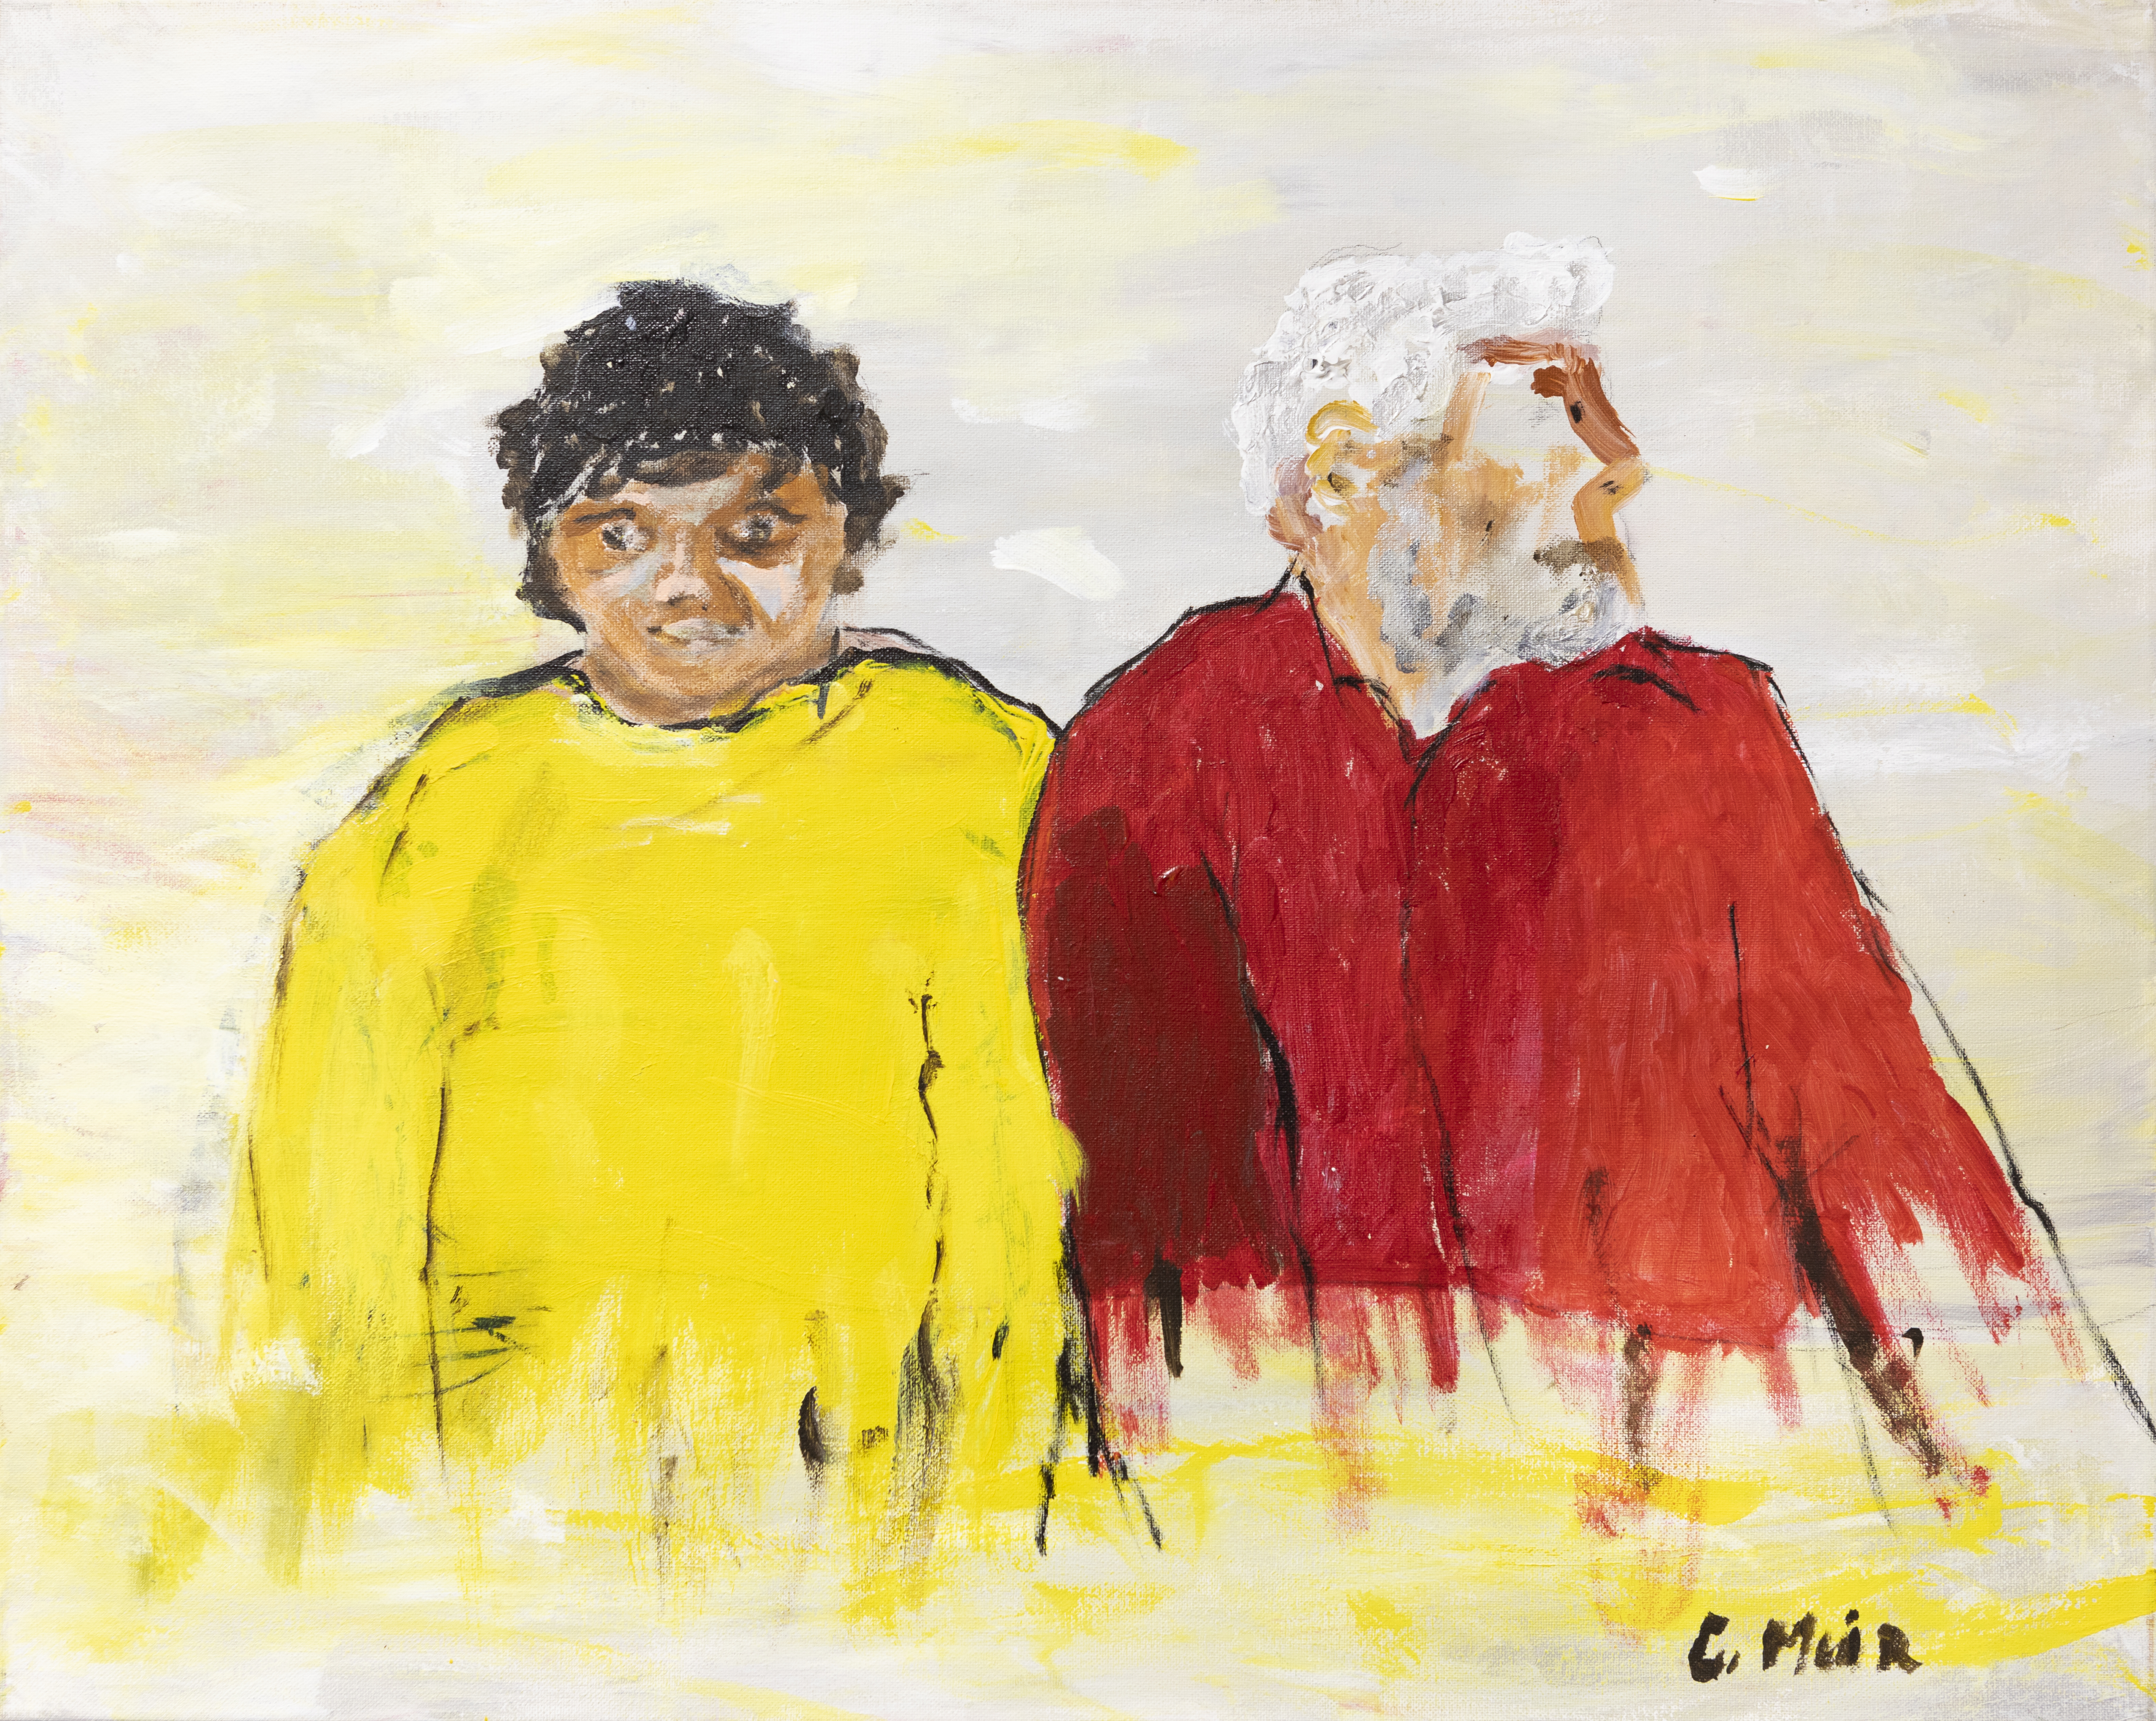 This portrait was painted from a photograph of artist Greg Muir and his Grandpa/Pop. On the left is Greg, in his thirties with a full head of dark curly hair, wearing a bright yellow shirt. On the right is Pop with short white hair and a trimmed grey beard, wearing a bright red shirt.